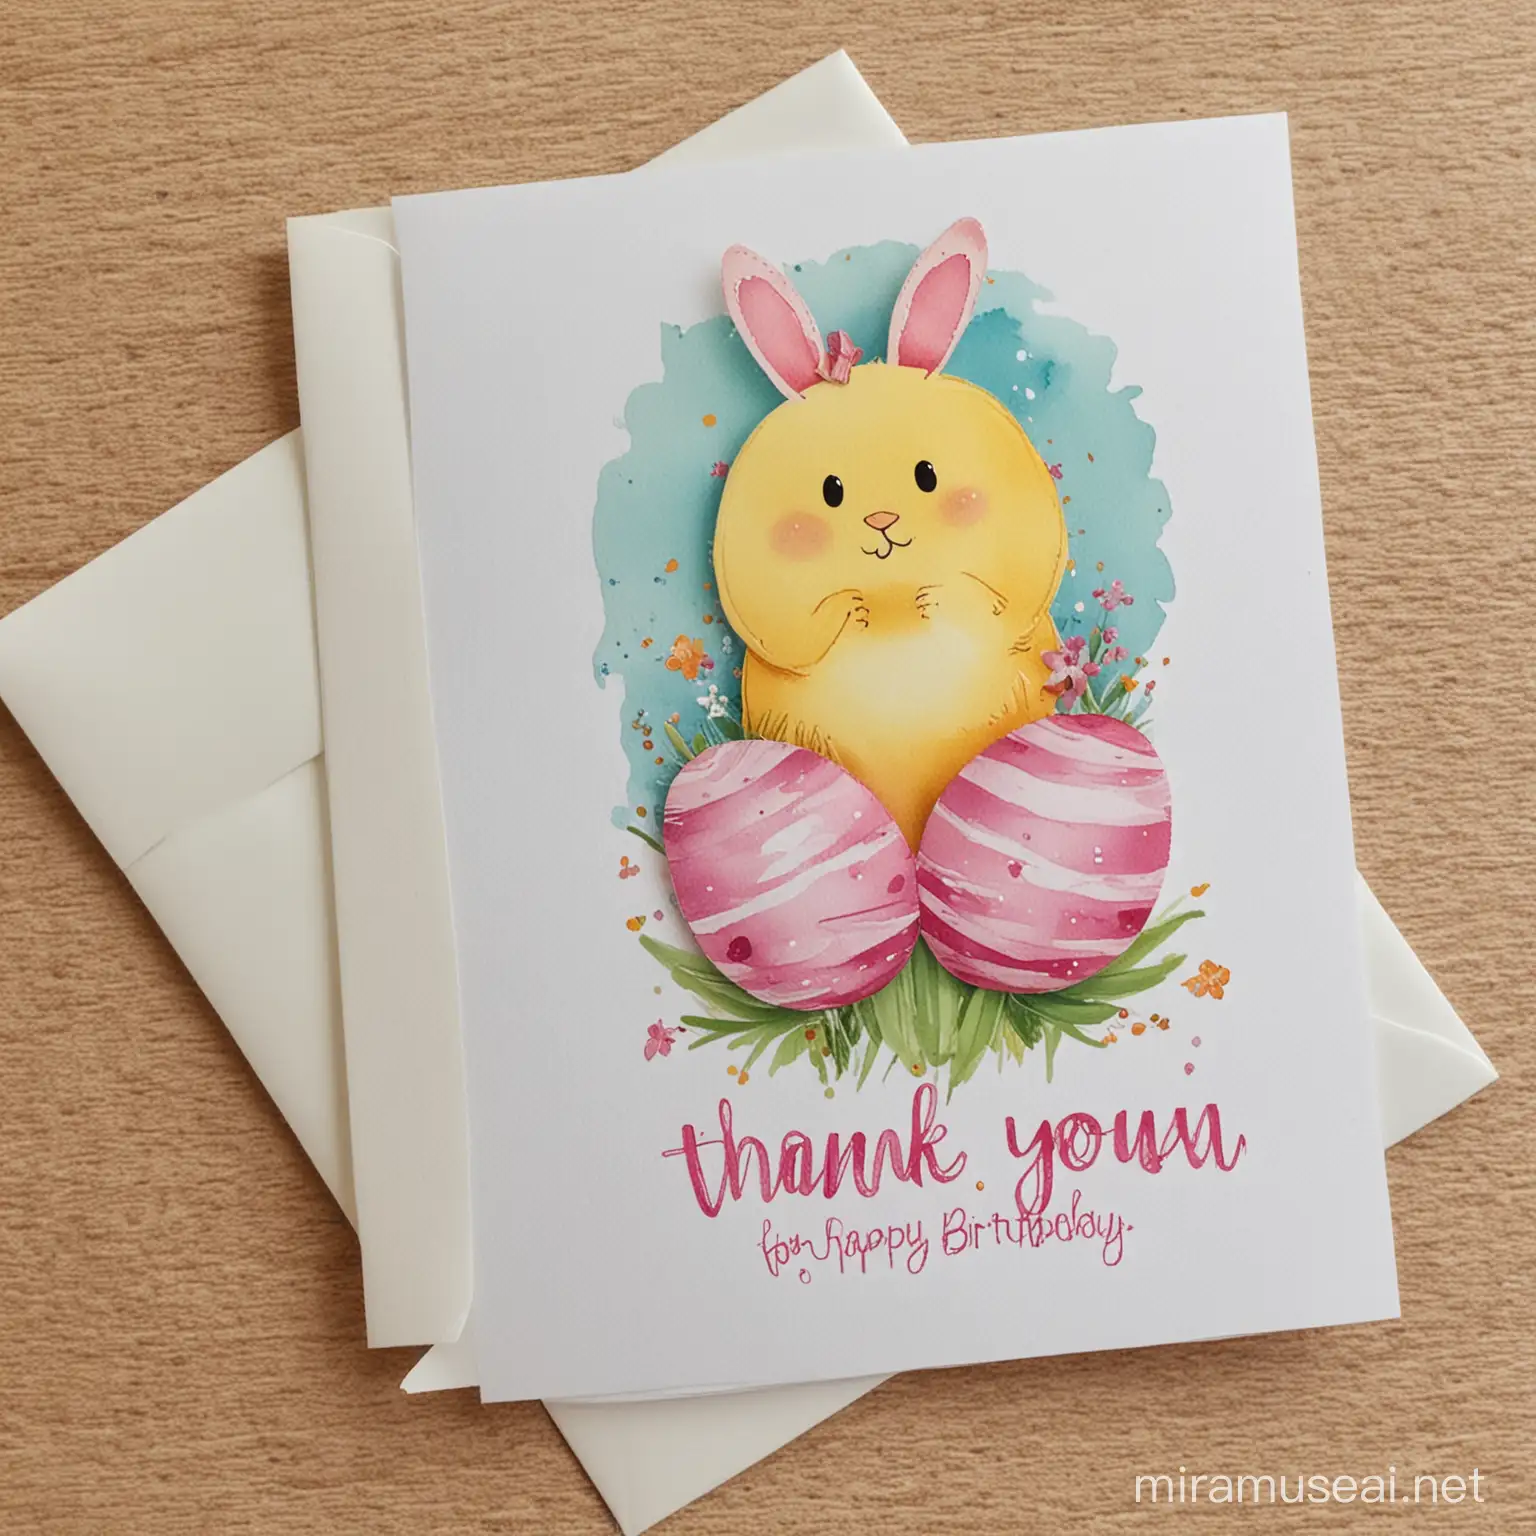 Celebrating with Festive Easter Eggs Birthday Thank You Card Image